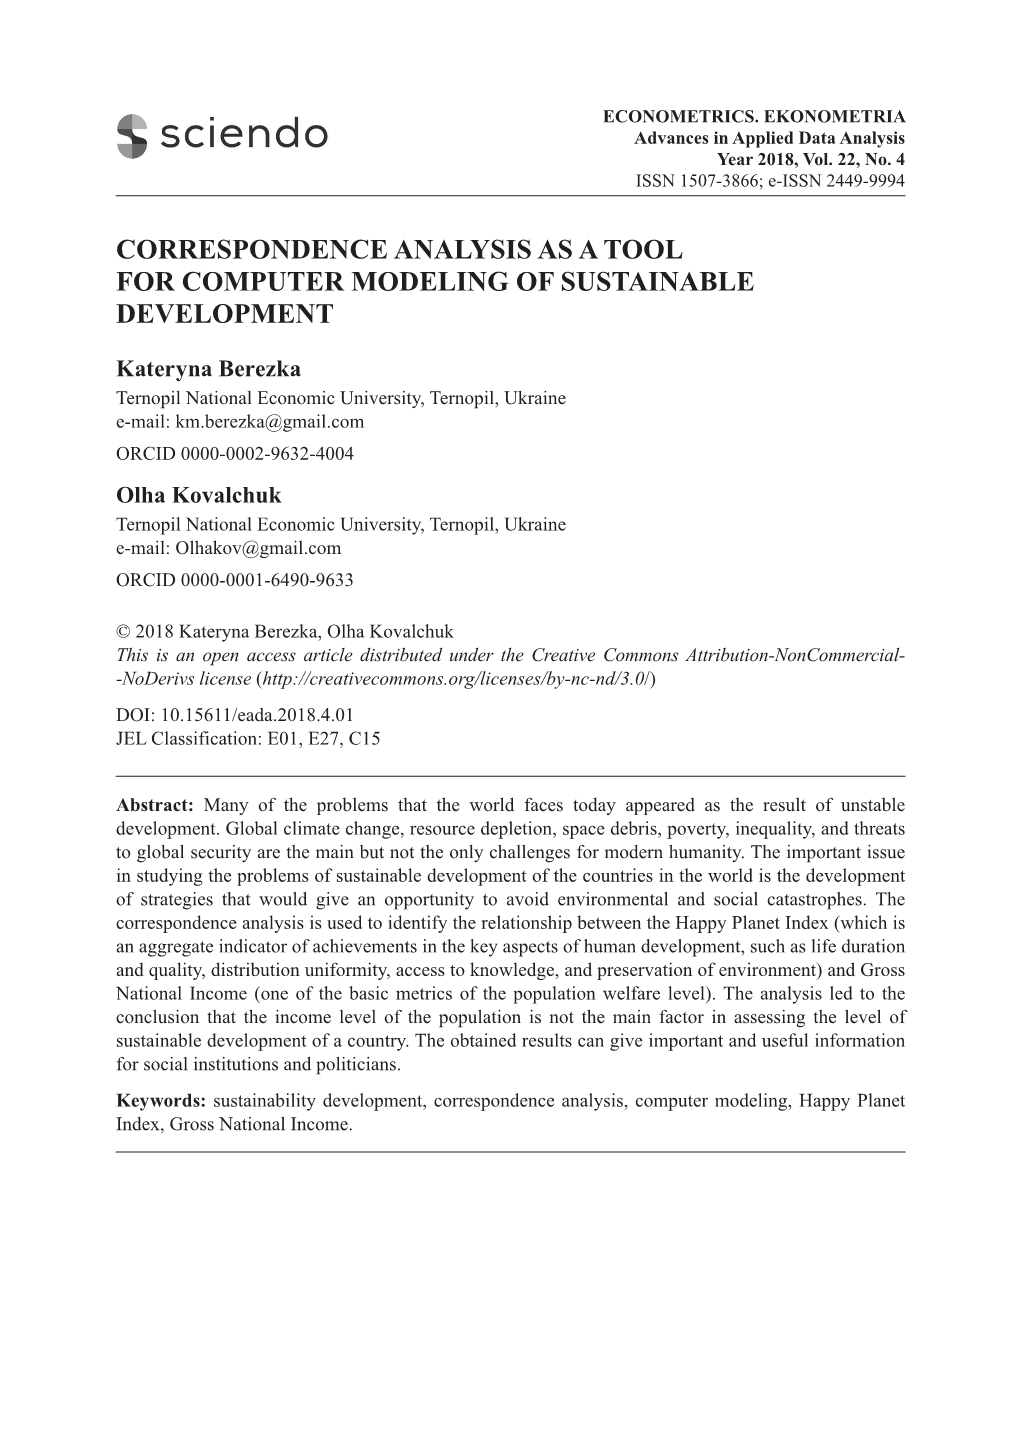 Сorrespondence Analysis As a Tool for Computer Modeling of Sustainable Development